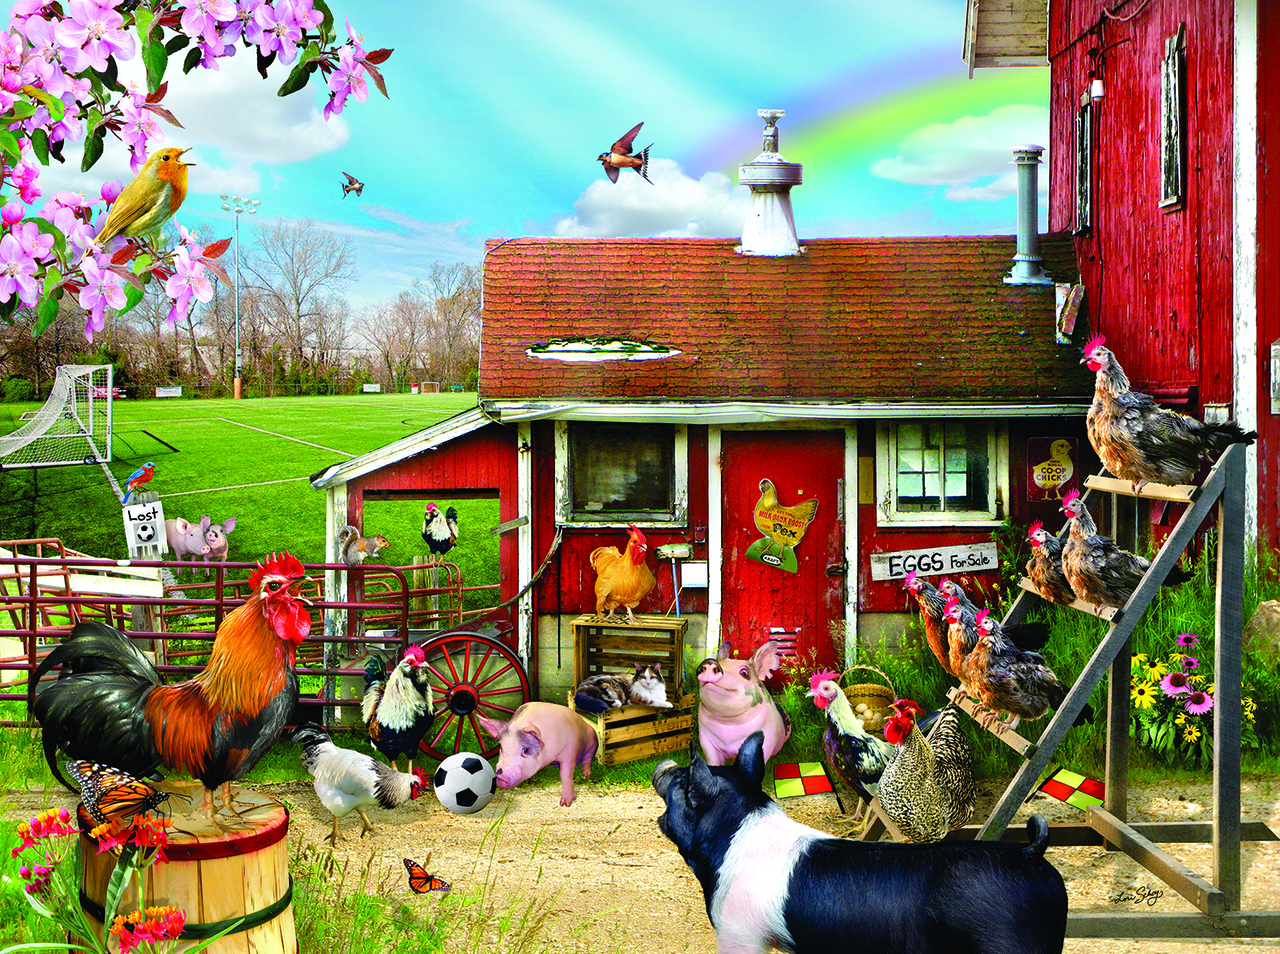 SunsOut Puzzles - #35068 Barnyard Soccer - 300pc Jigsaw Puzzle